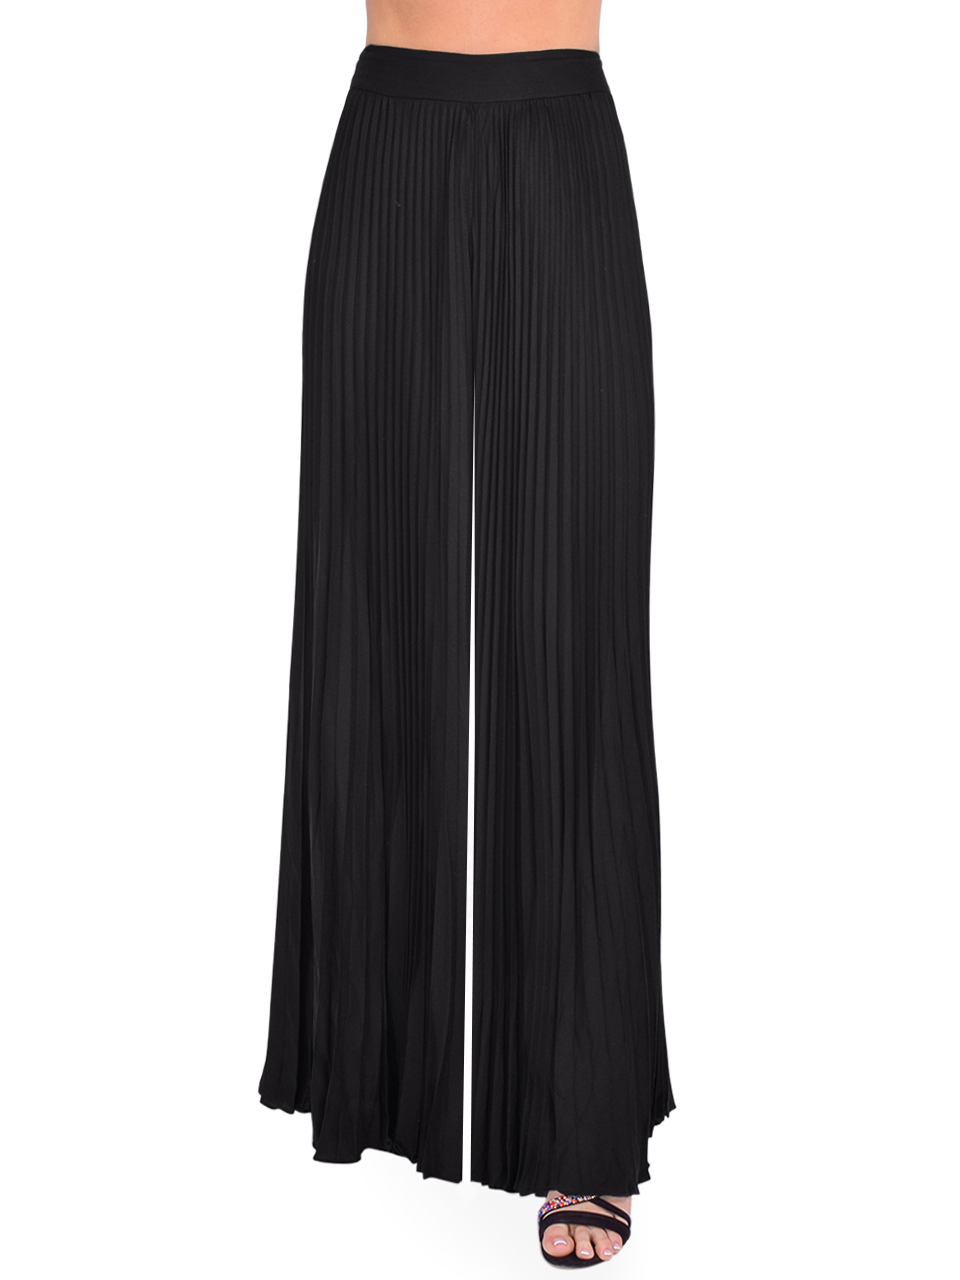 ALICE + OLIVIA Copen Pleated Pants in Black Front View 